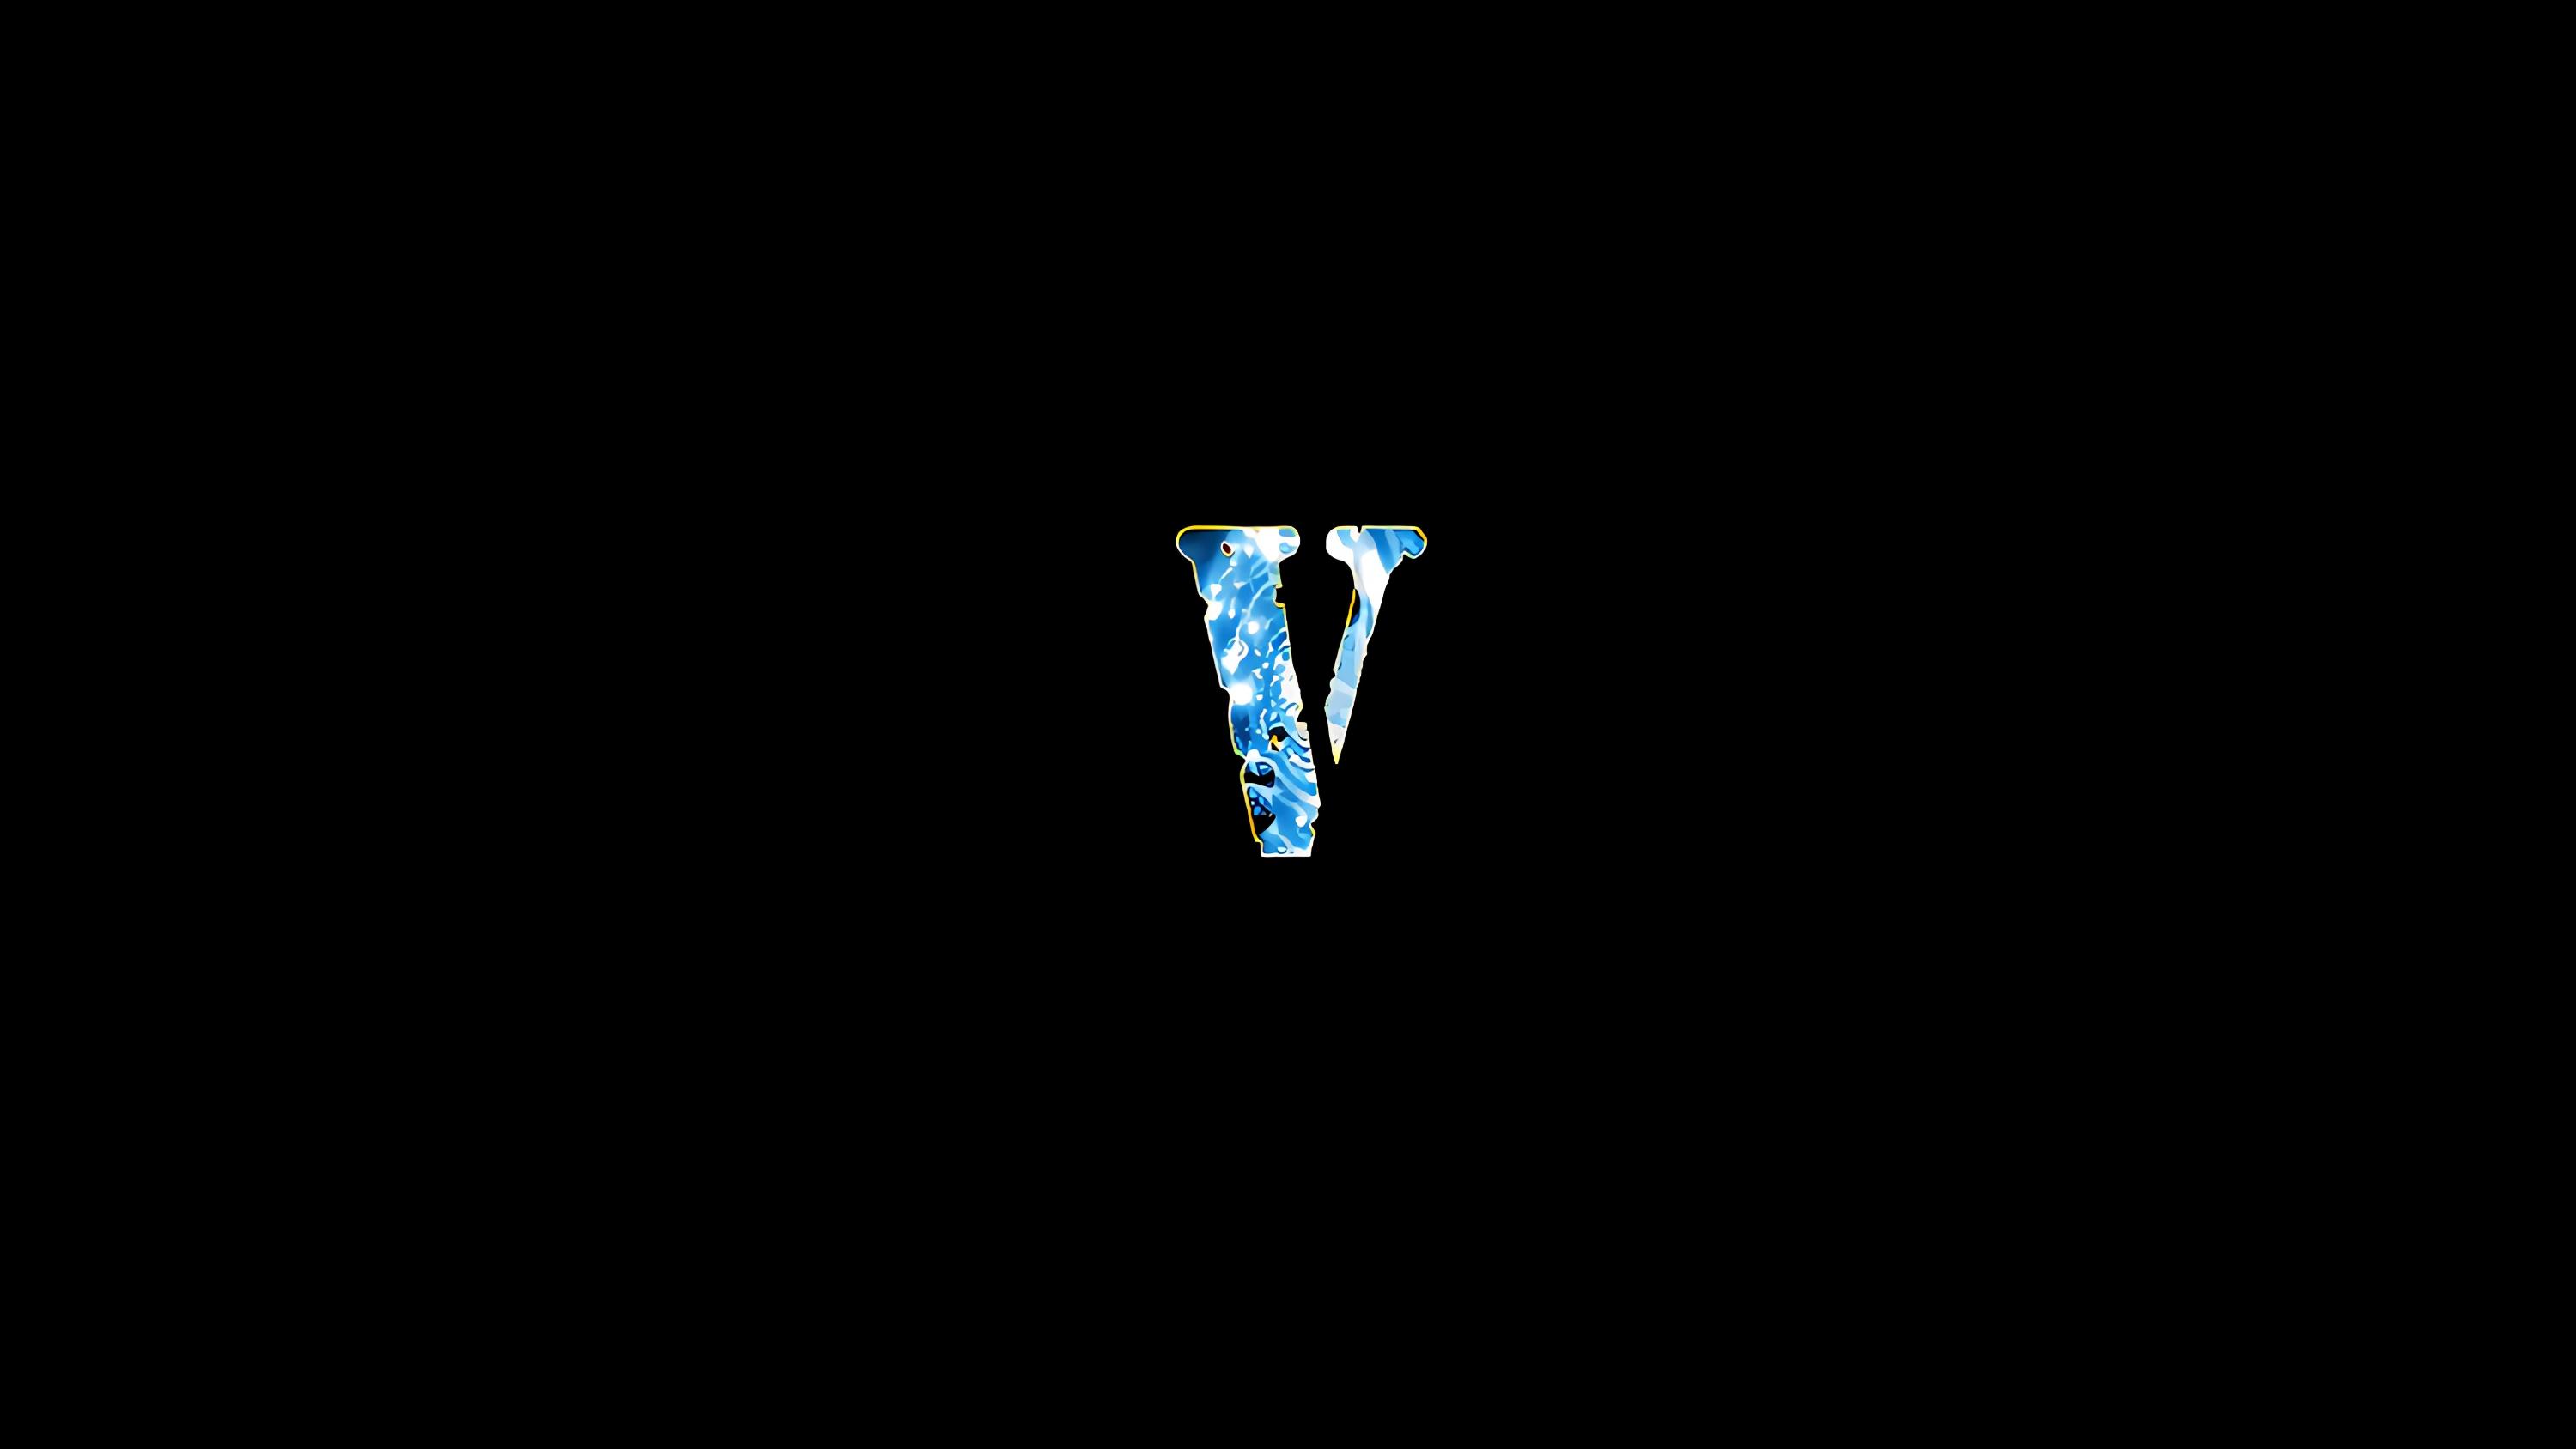 Blue Vlone Wallpapers